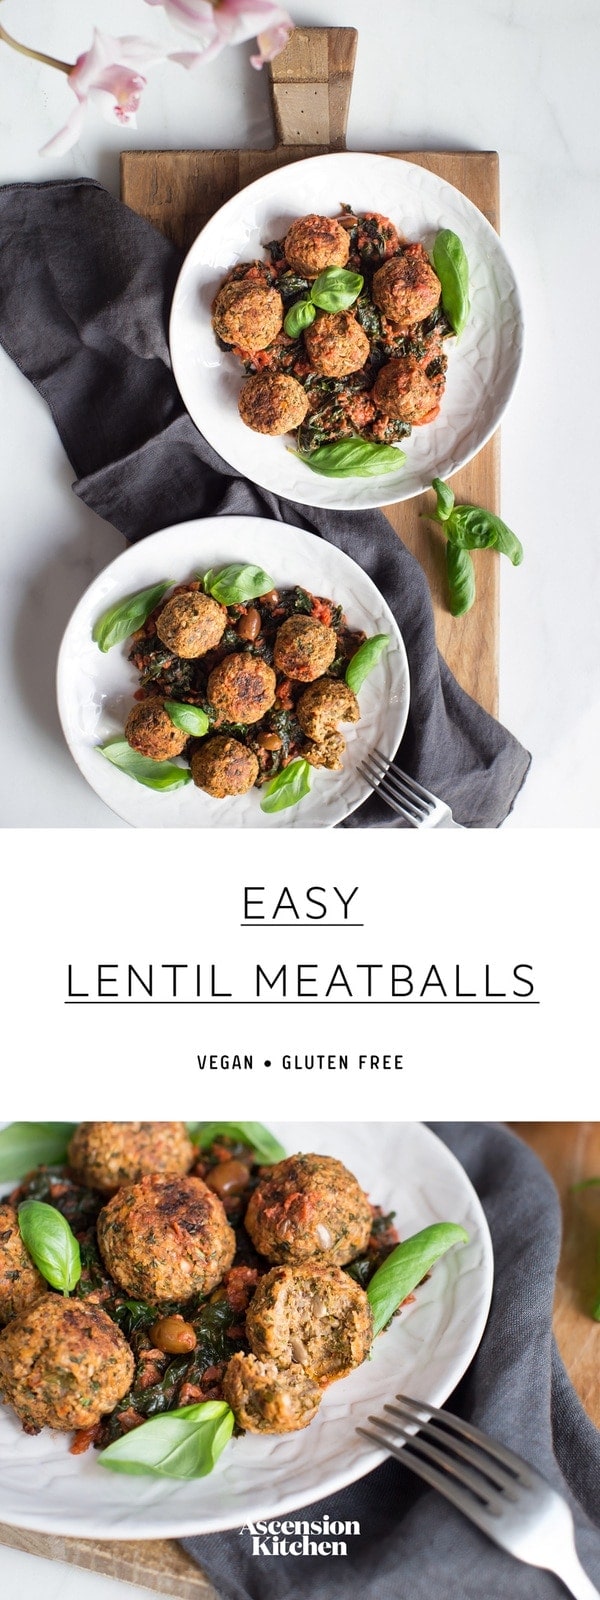 Quick and easy vegan lentil meatballs. #lentilmeatballsvegan #lentilmeatballsvegetarian #lentilmeatballseasy #lentilmeatballstomato #lentilmeatballsred #lentilmeatballsbaked #lentilmeatballshealthy #lentilmeatballsglutenfree #lentilmeatballsitalian #lentilmeatballssimple #veganmeatballs #AscensionKitchen // Pin to your own inspiration board! //